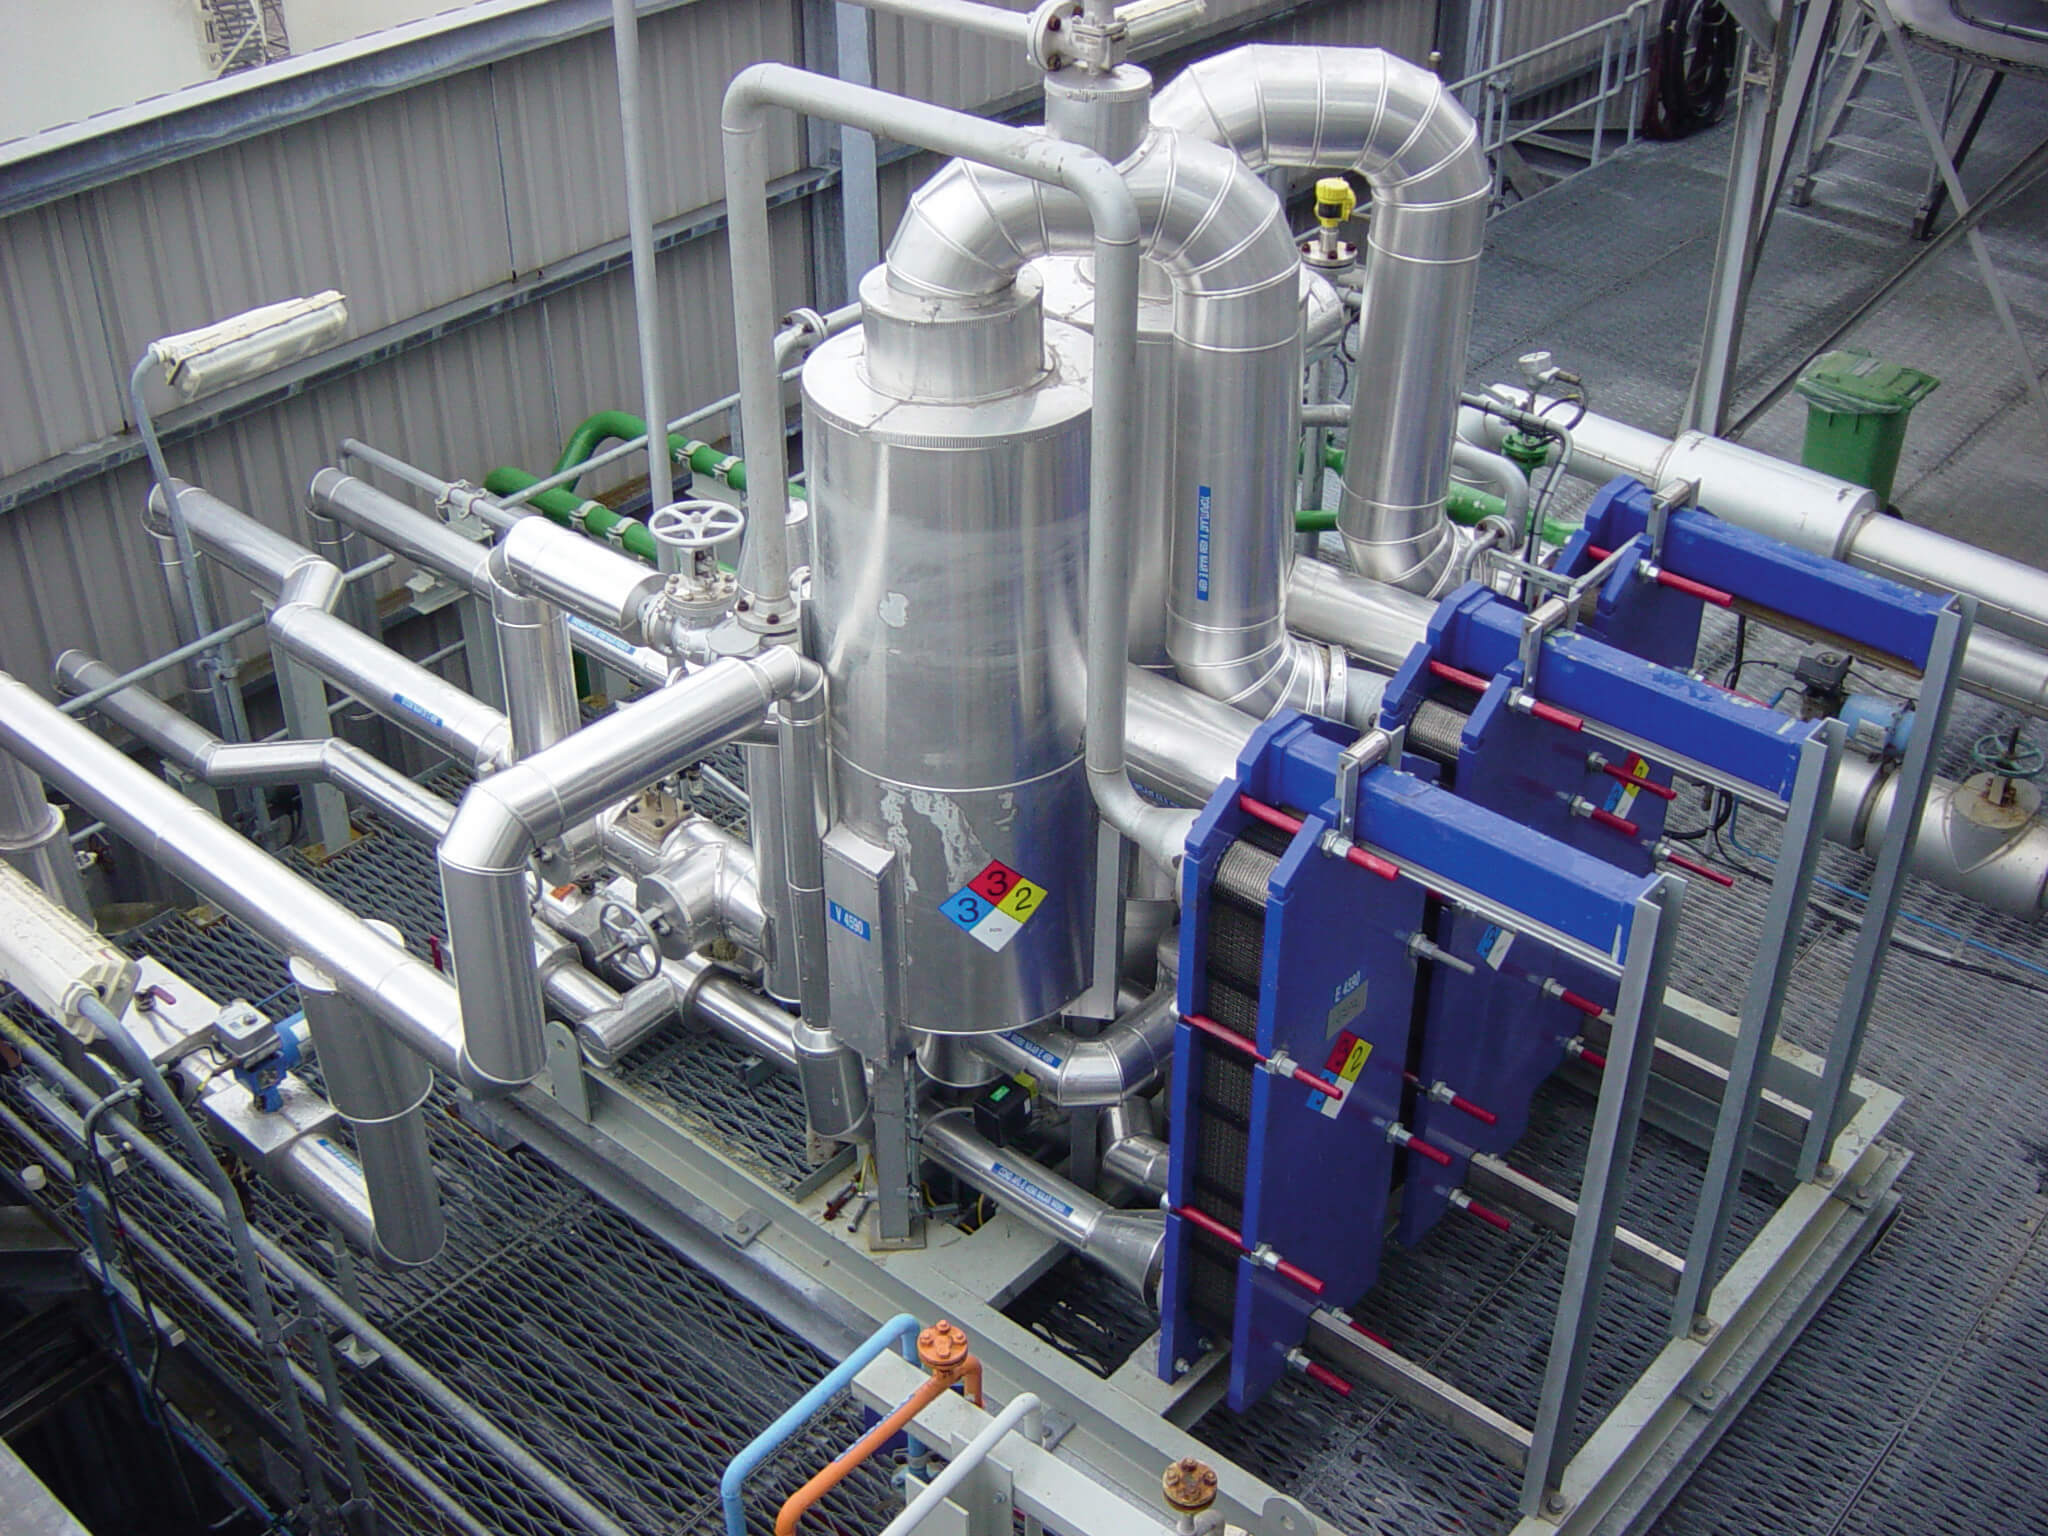 Equipment used in protein processing